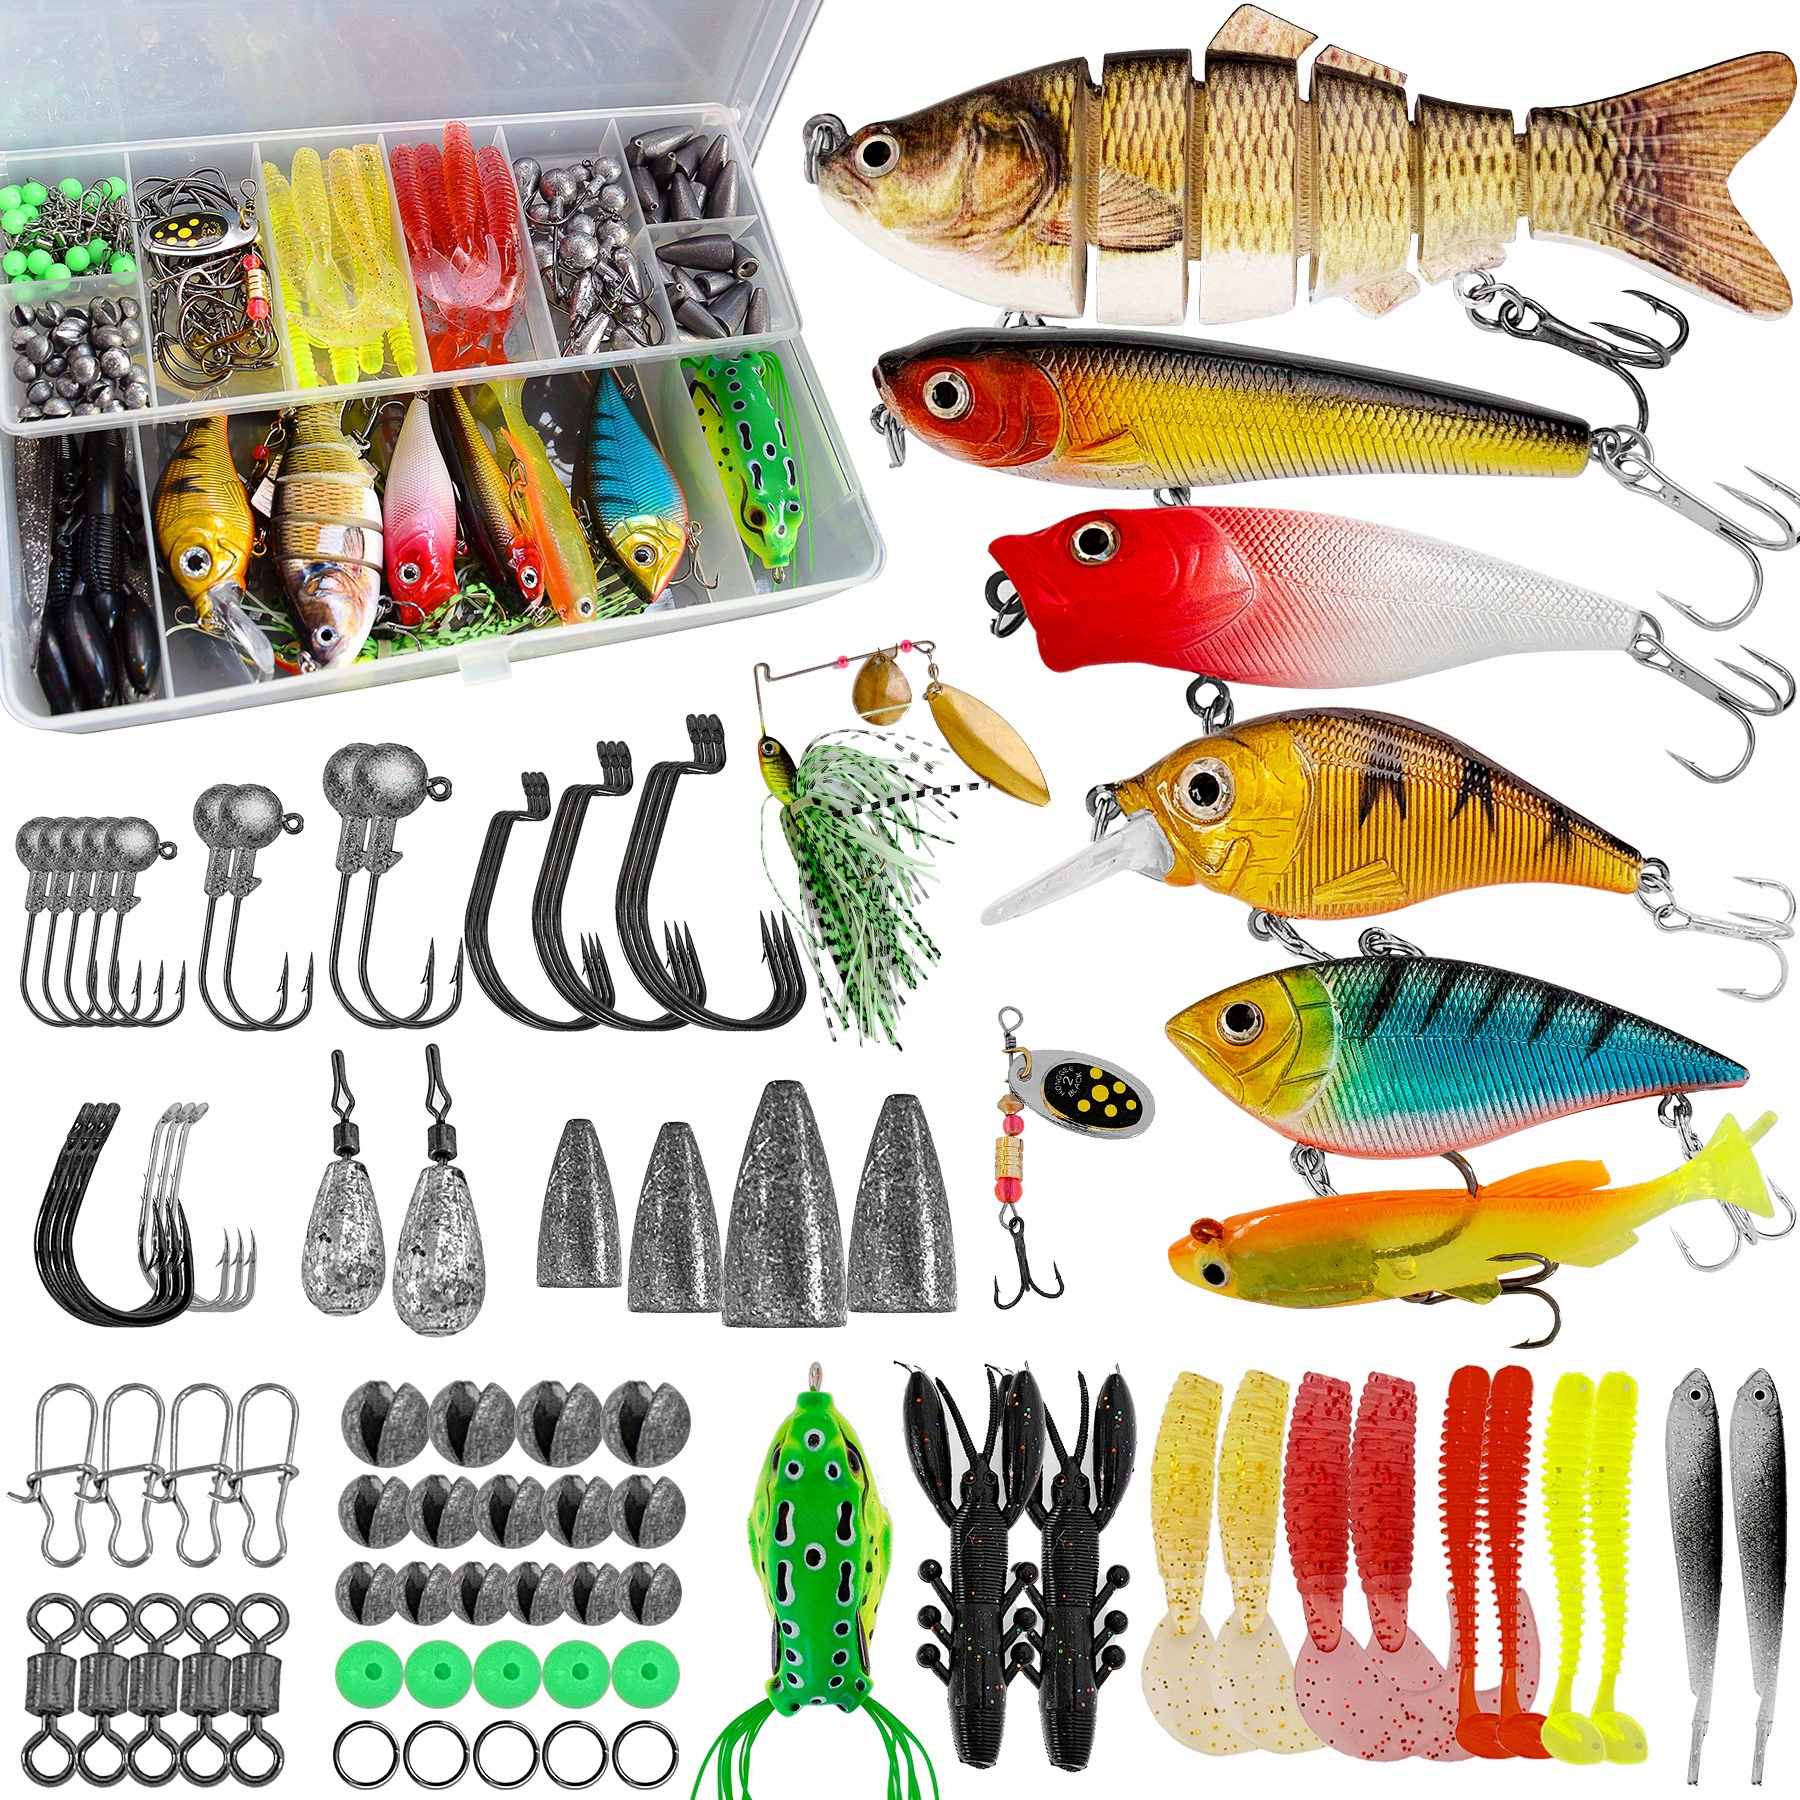 306 Pcs/Lot Complete Fishing Kit With Tackle Box - Includes Hooks, Beans,  Connectors And Lures For Easy Access To Fishing